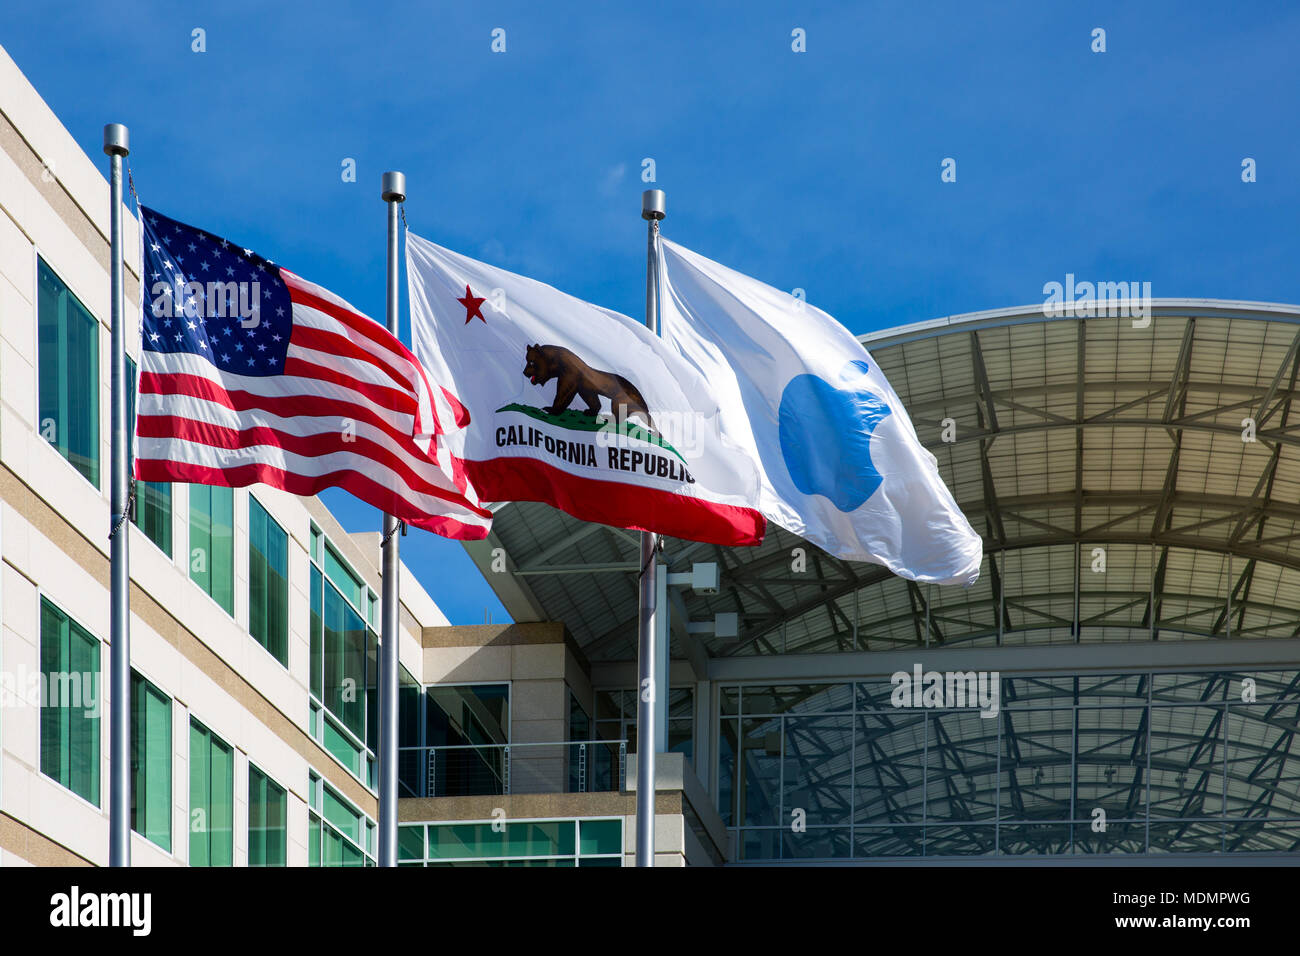 Apple Infinite Loop, Cupertino, California, USA - January 30, 2017: Apple flag in front of the Apple headquarters Stock Photo